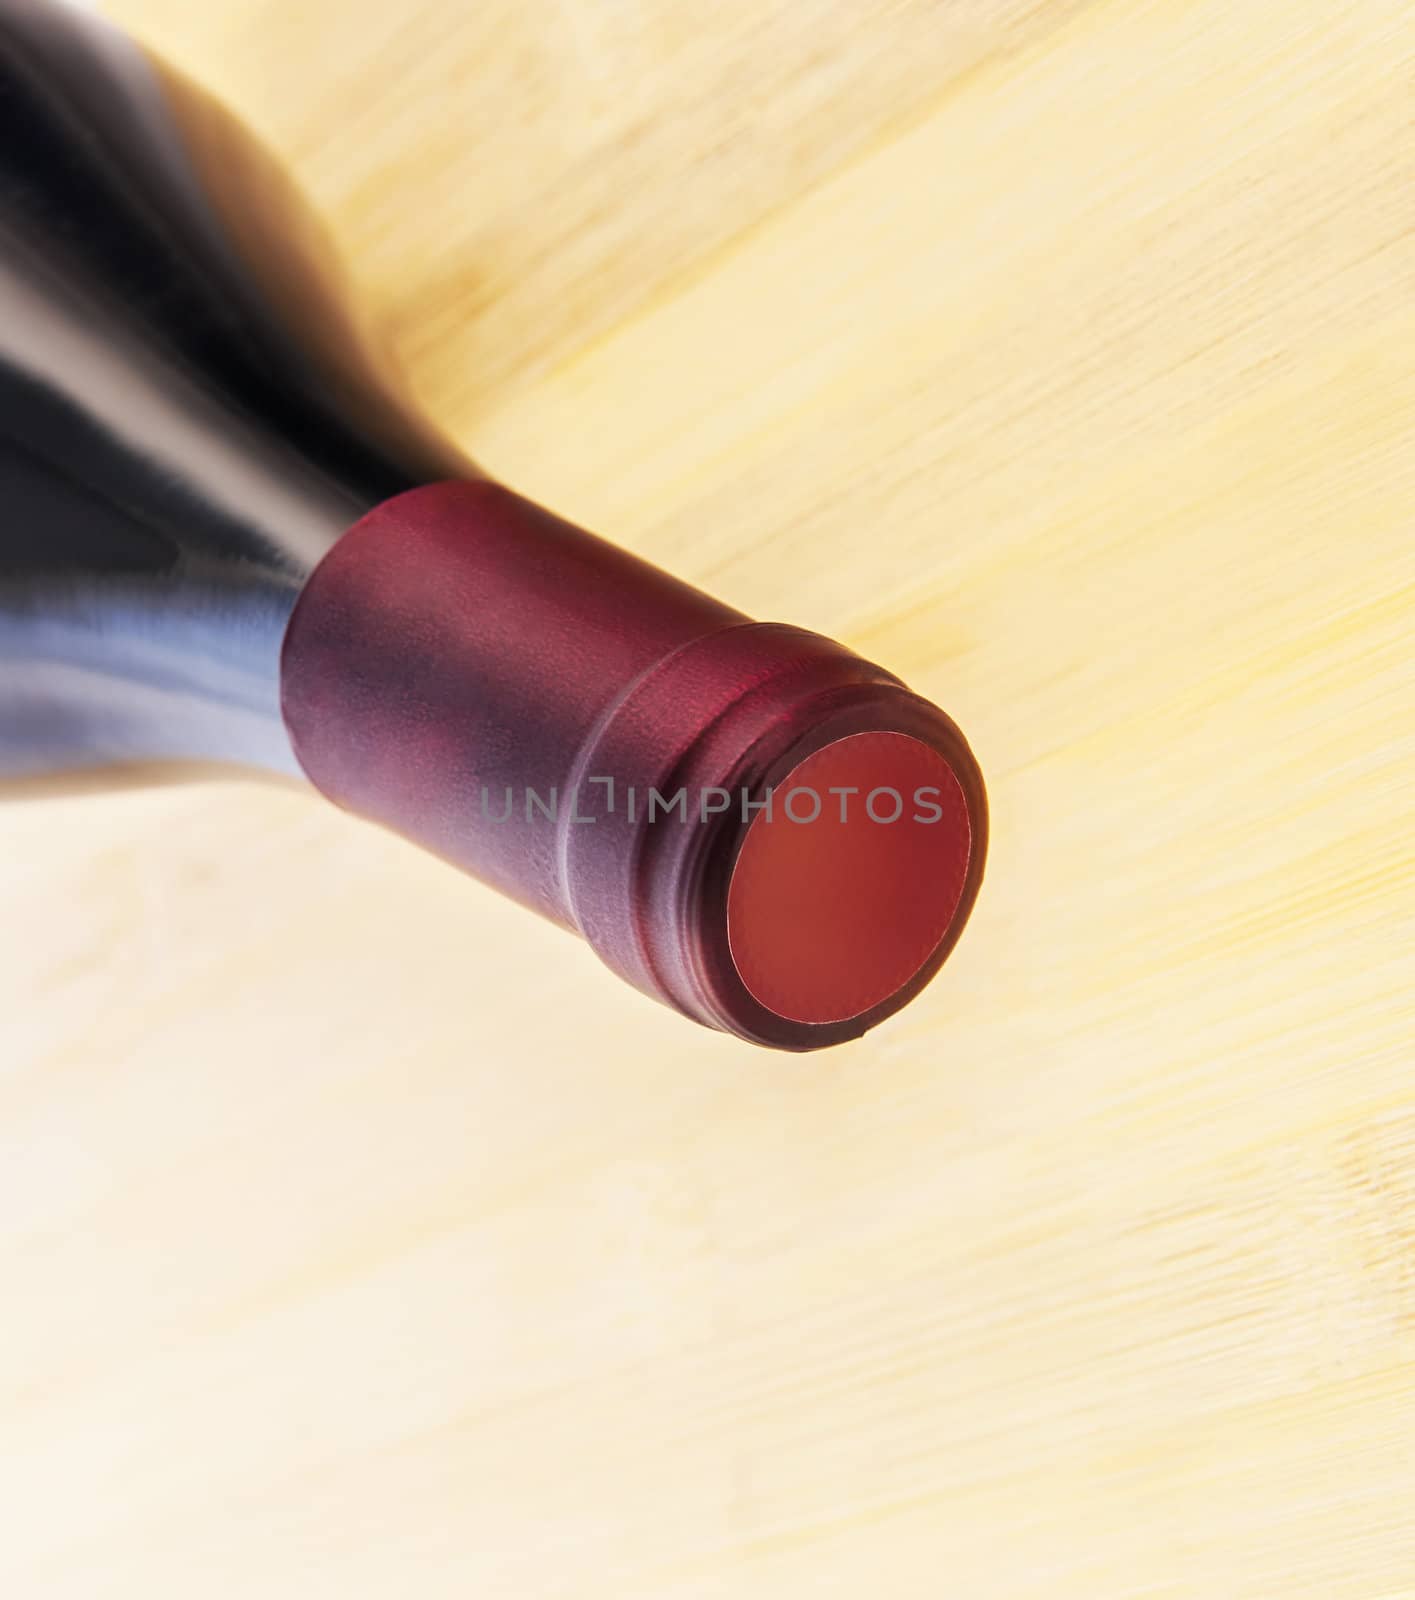 Red wine bottle on wooden table background by Zhukow